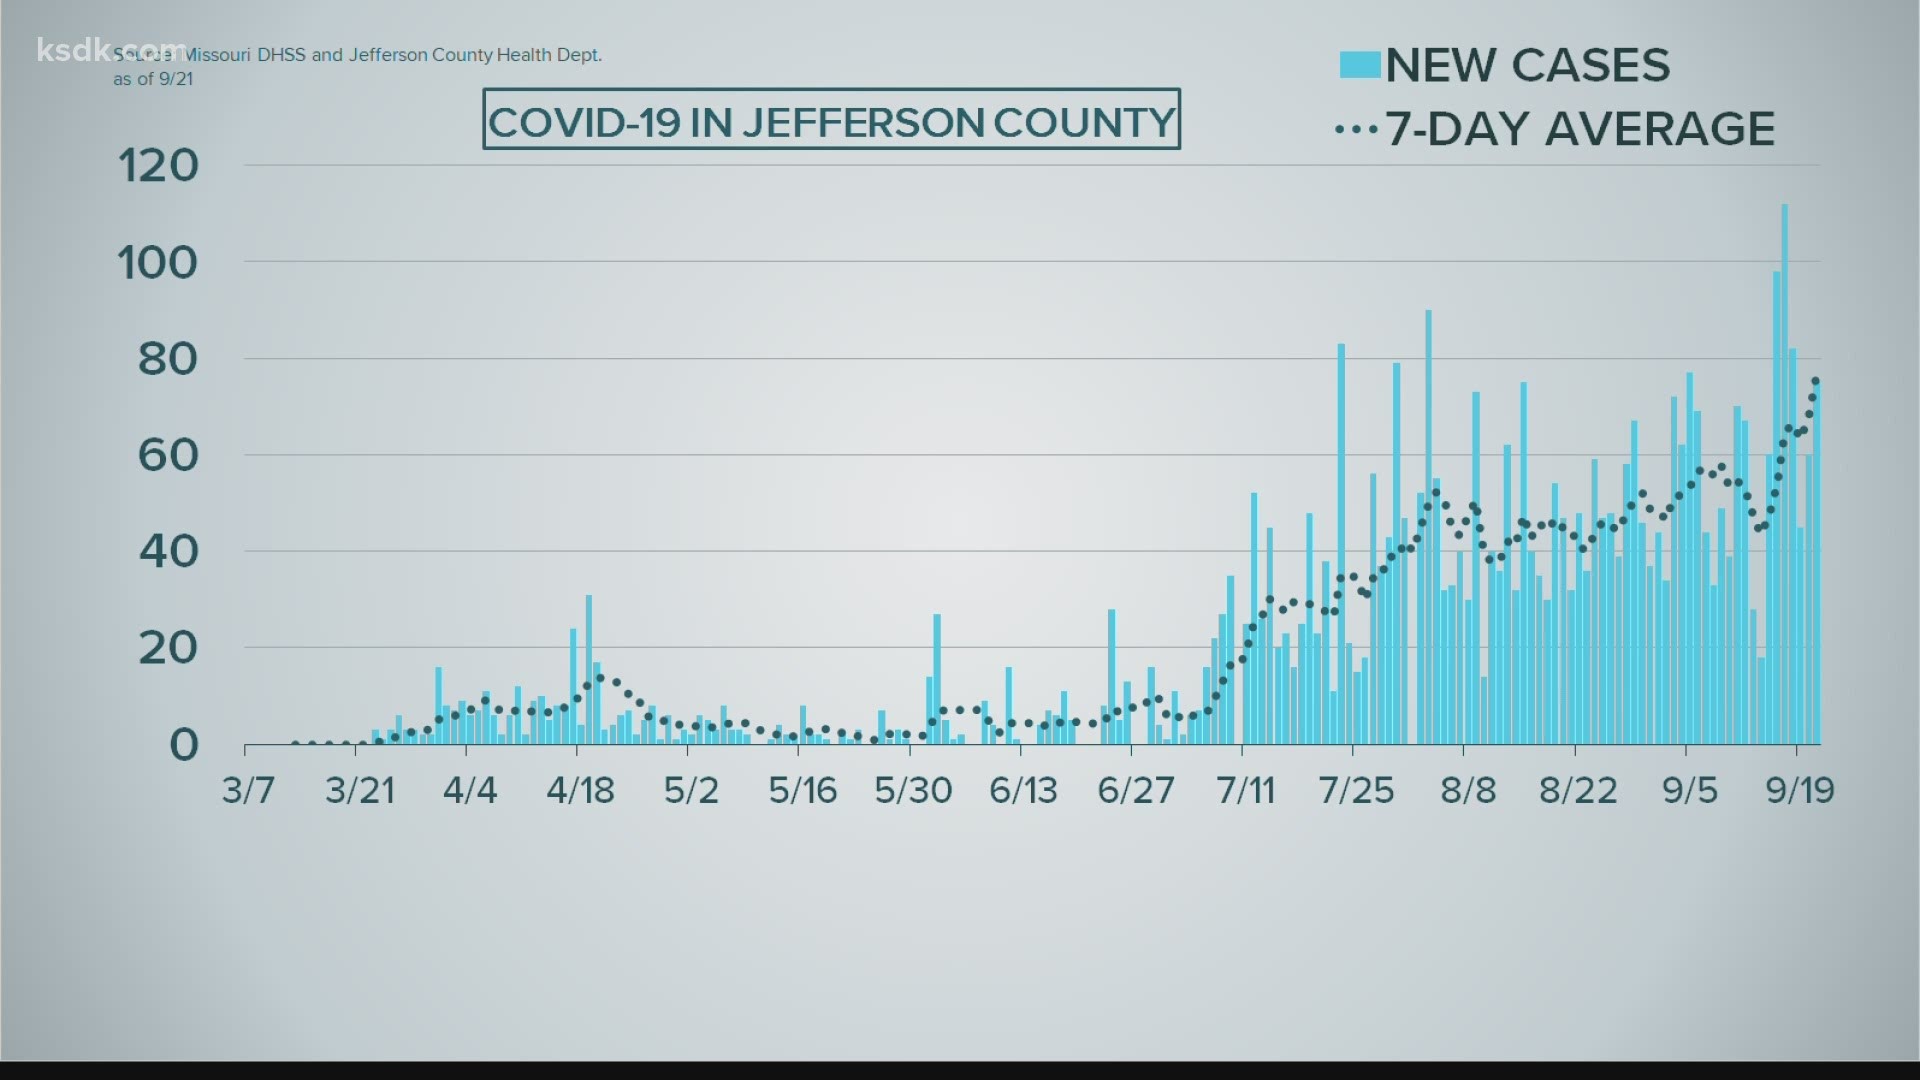 That's the fourth highest single day count for Jefferson County